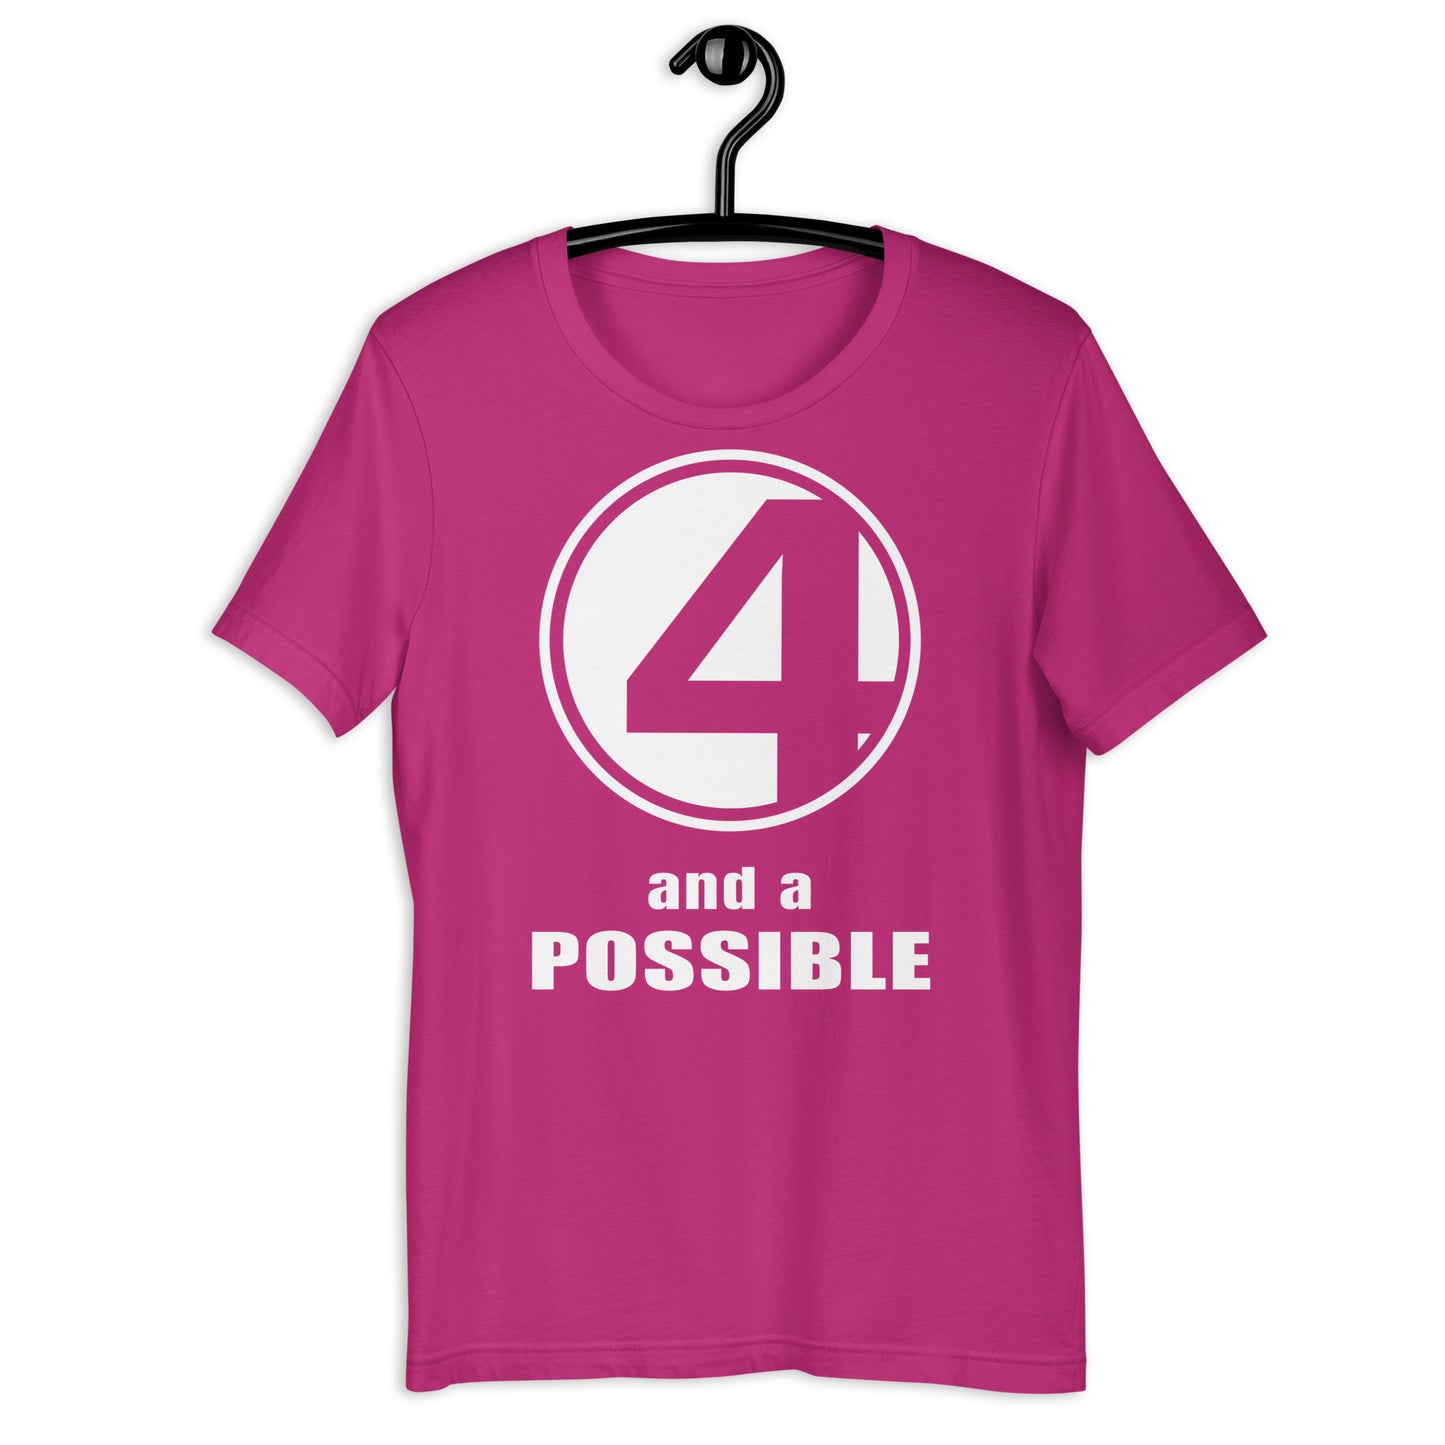 4 and a Possible Unisex t-shirt